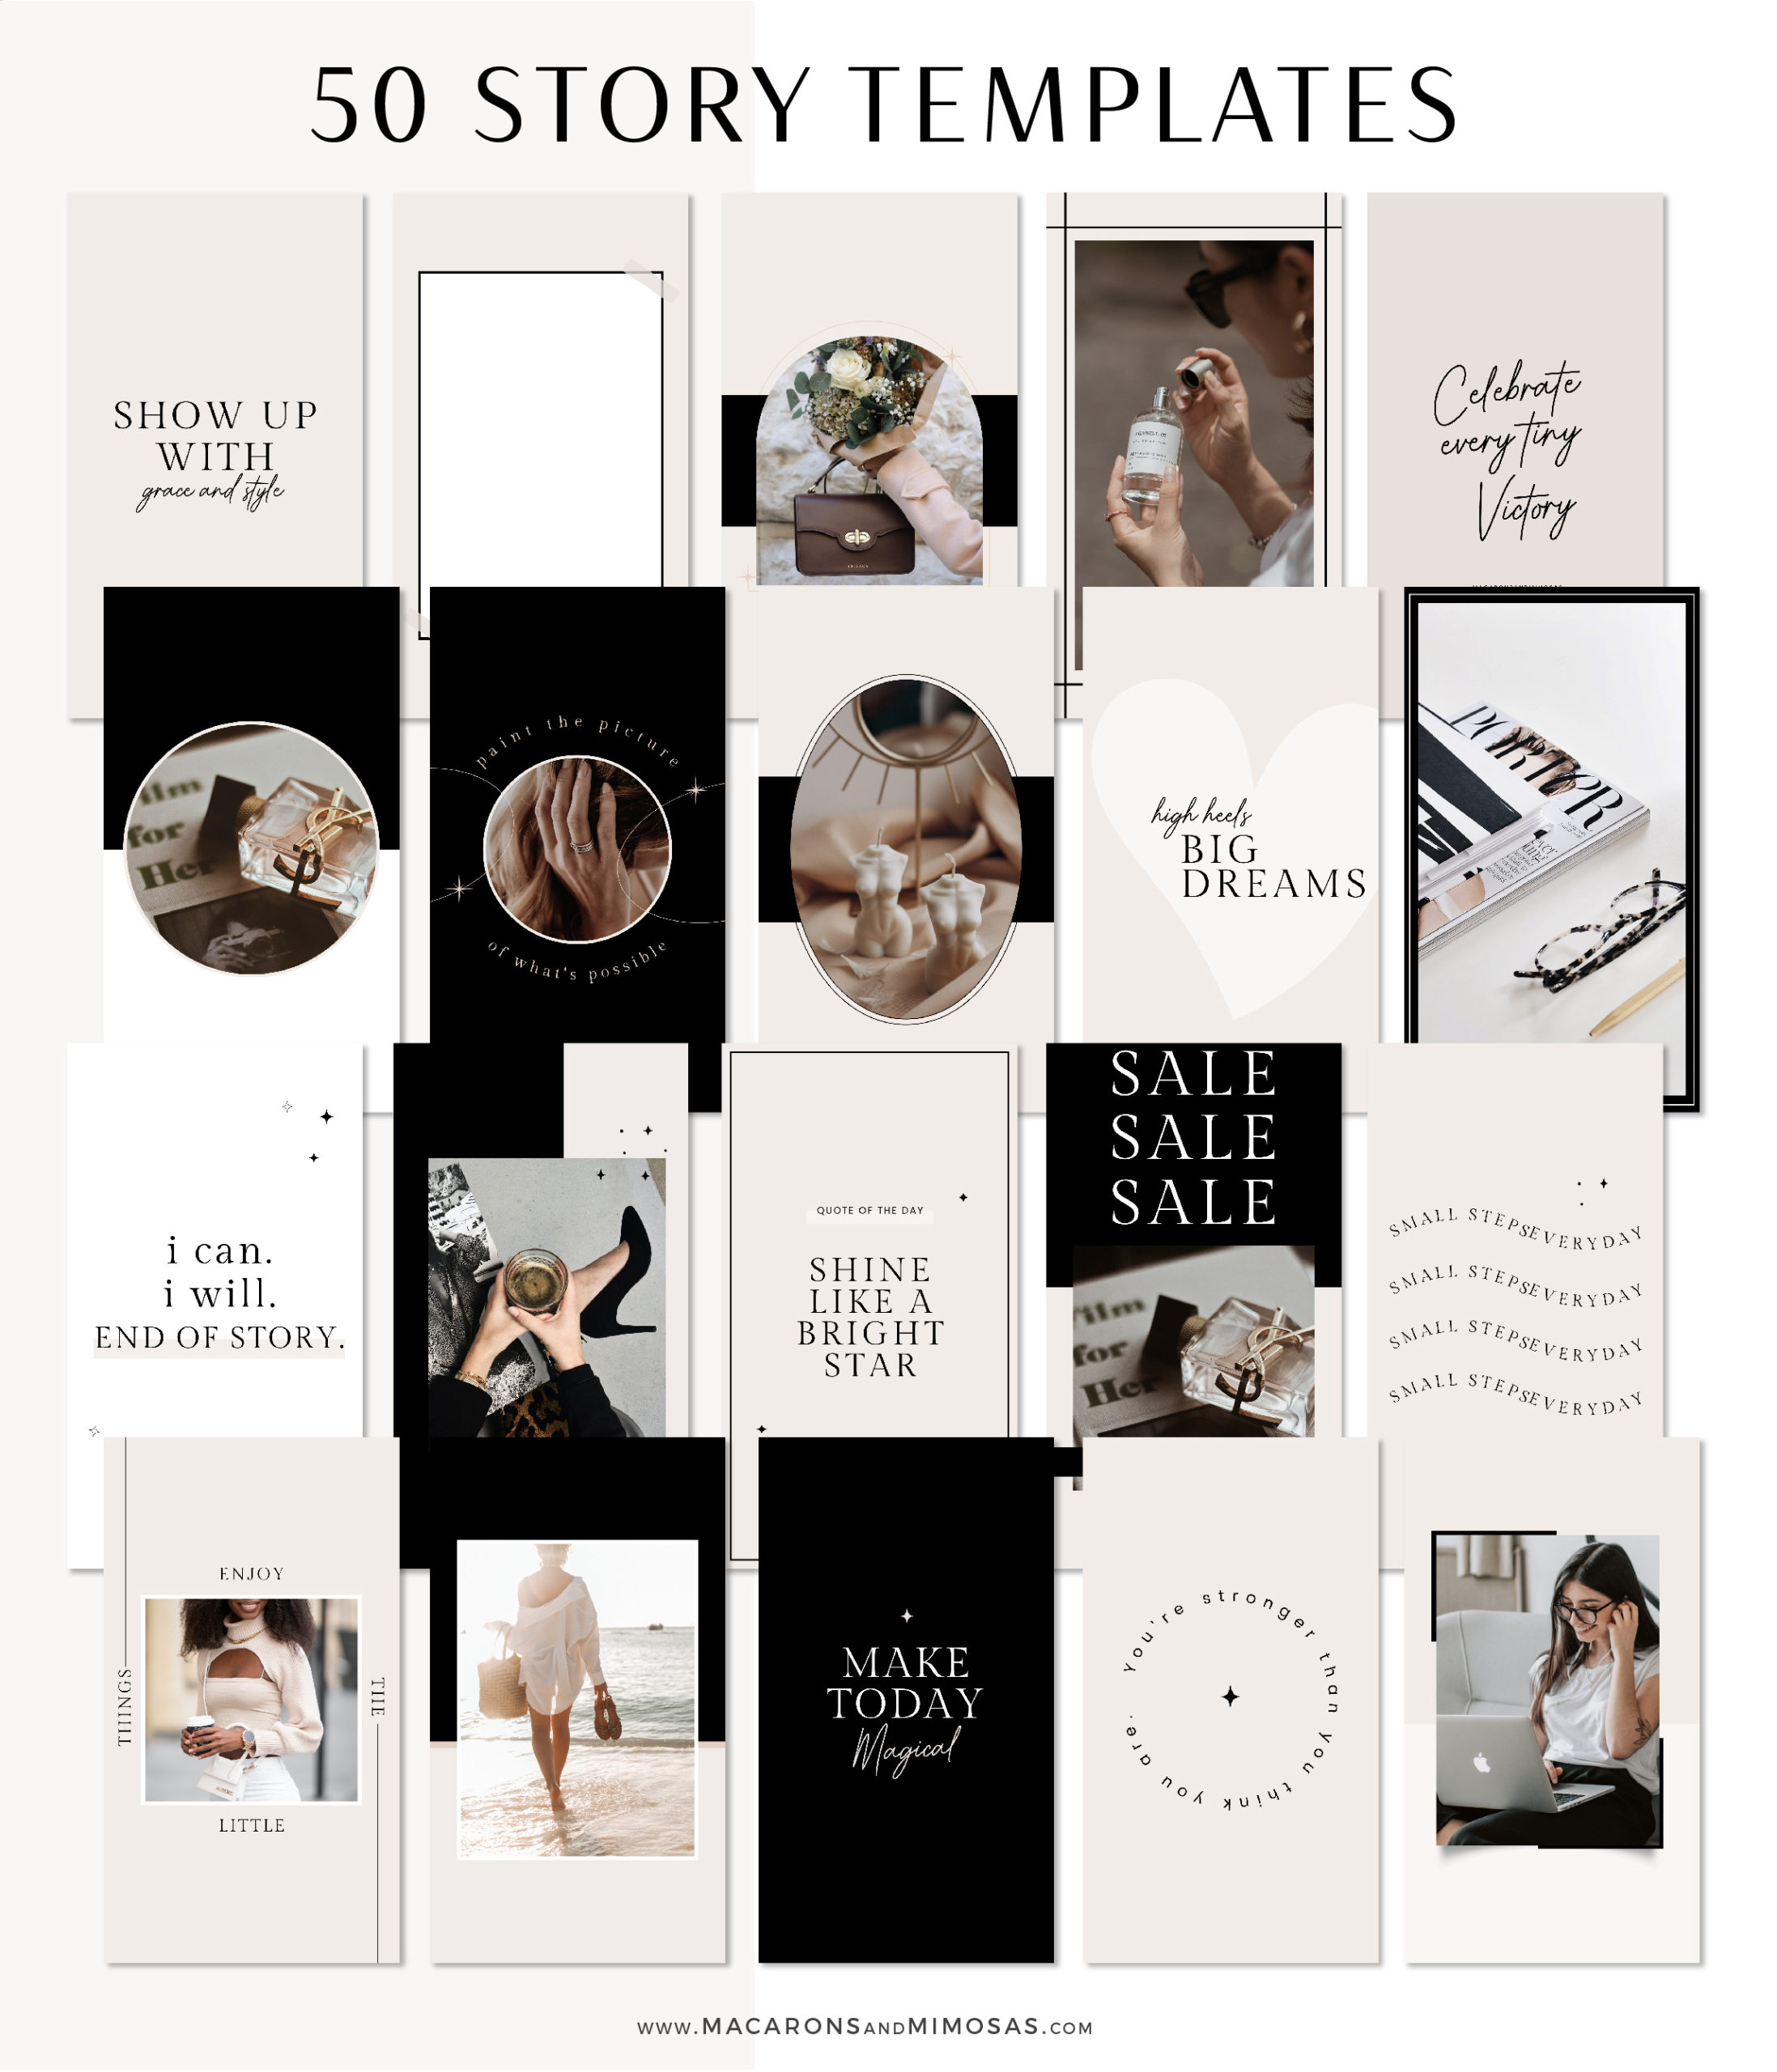 Modern Luxe Instagram Story Templates for Canva, Black White Instagram Templates for Stories Posts, Coach Templates for Instagram Reels